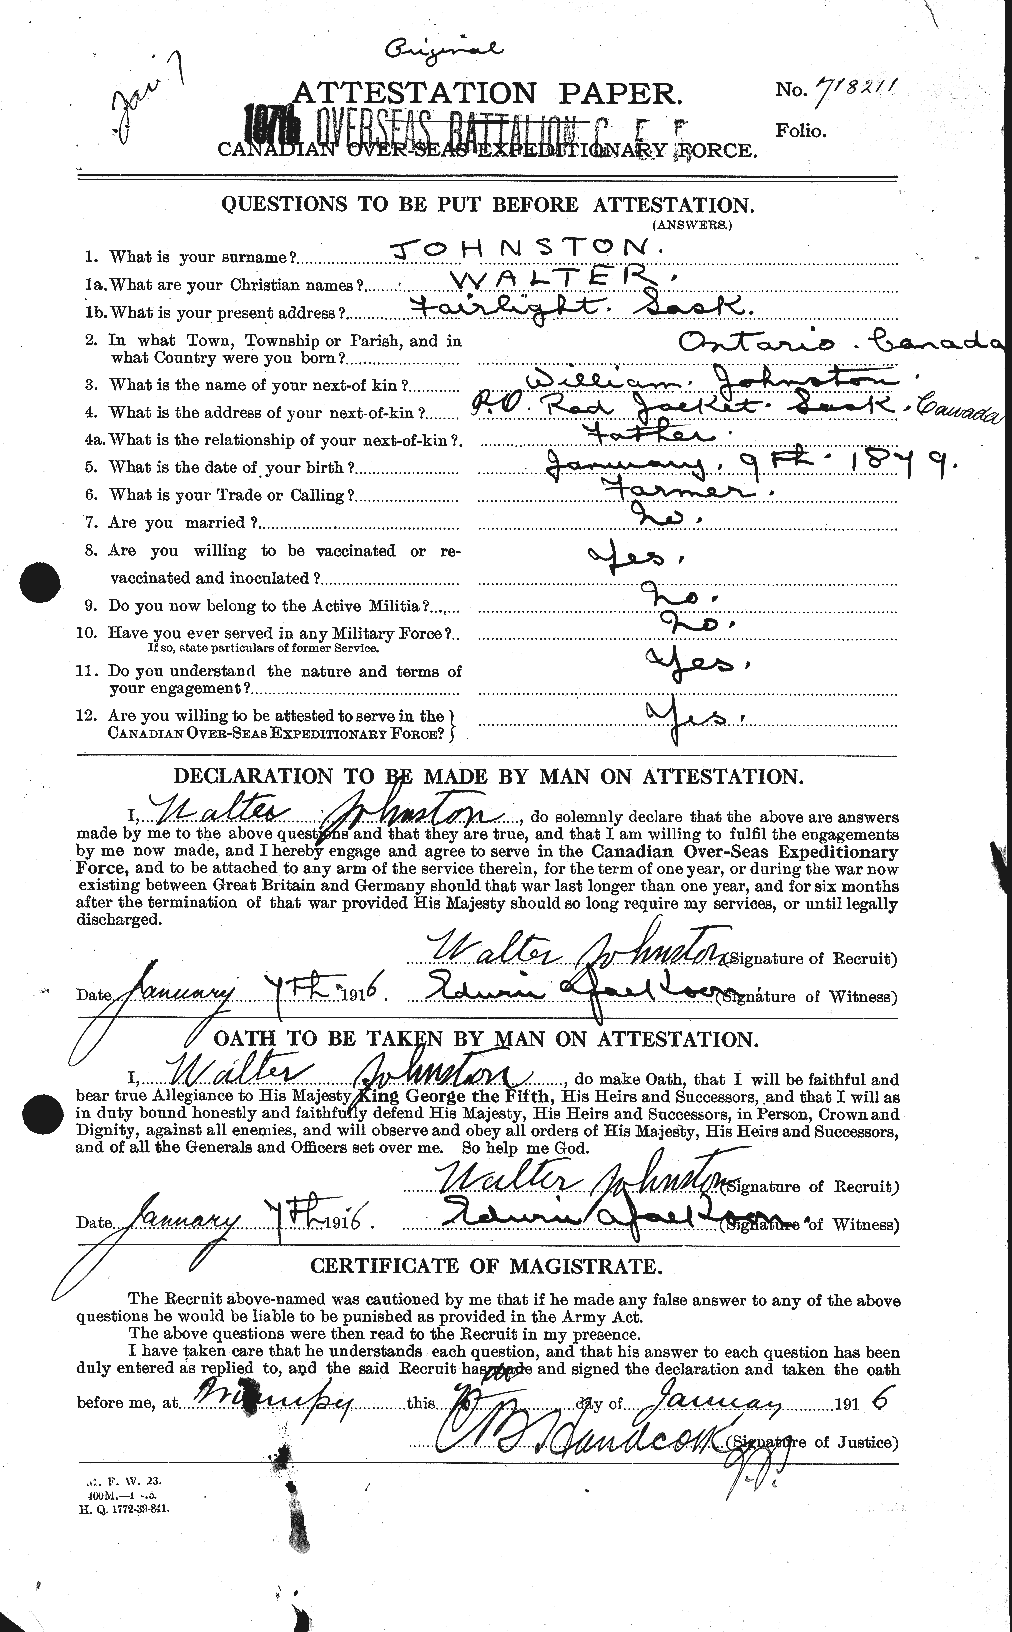 Personnel Records of the First World War - CEF 427199a